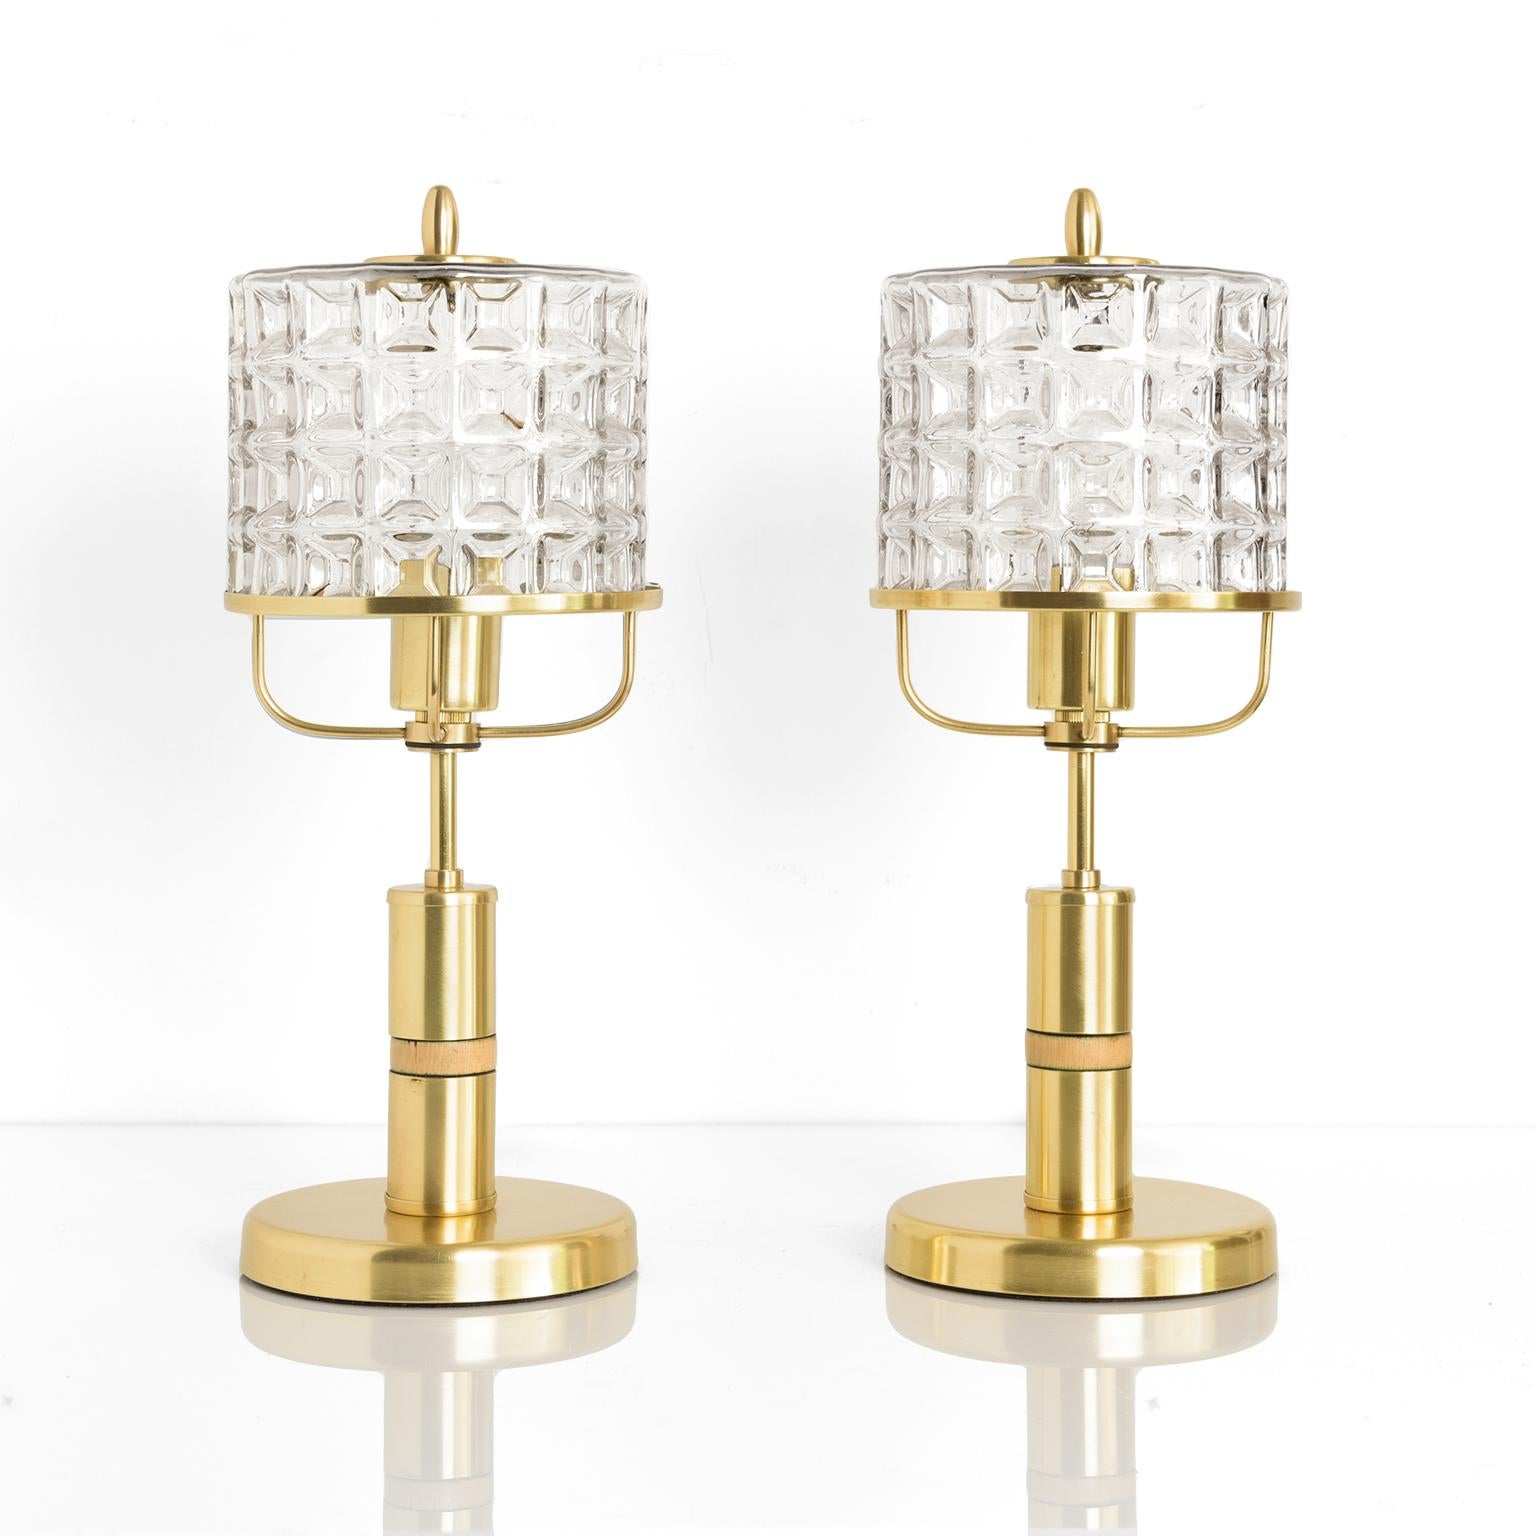 Pair of Kamenicky Senov mid-century Modern table lamps with brass plated steel frames. Each lamp has a single standard base socket and has been newly rewired for use in the USA. The clear glass shades have a 3 dimensional pattern and rest on a